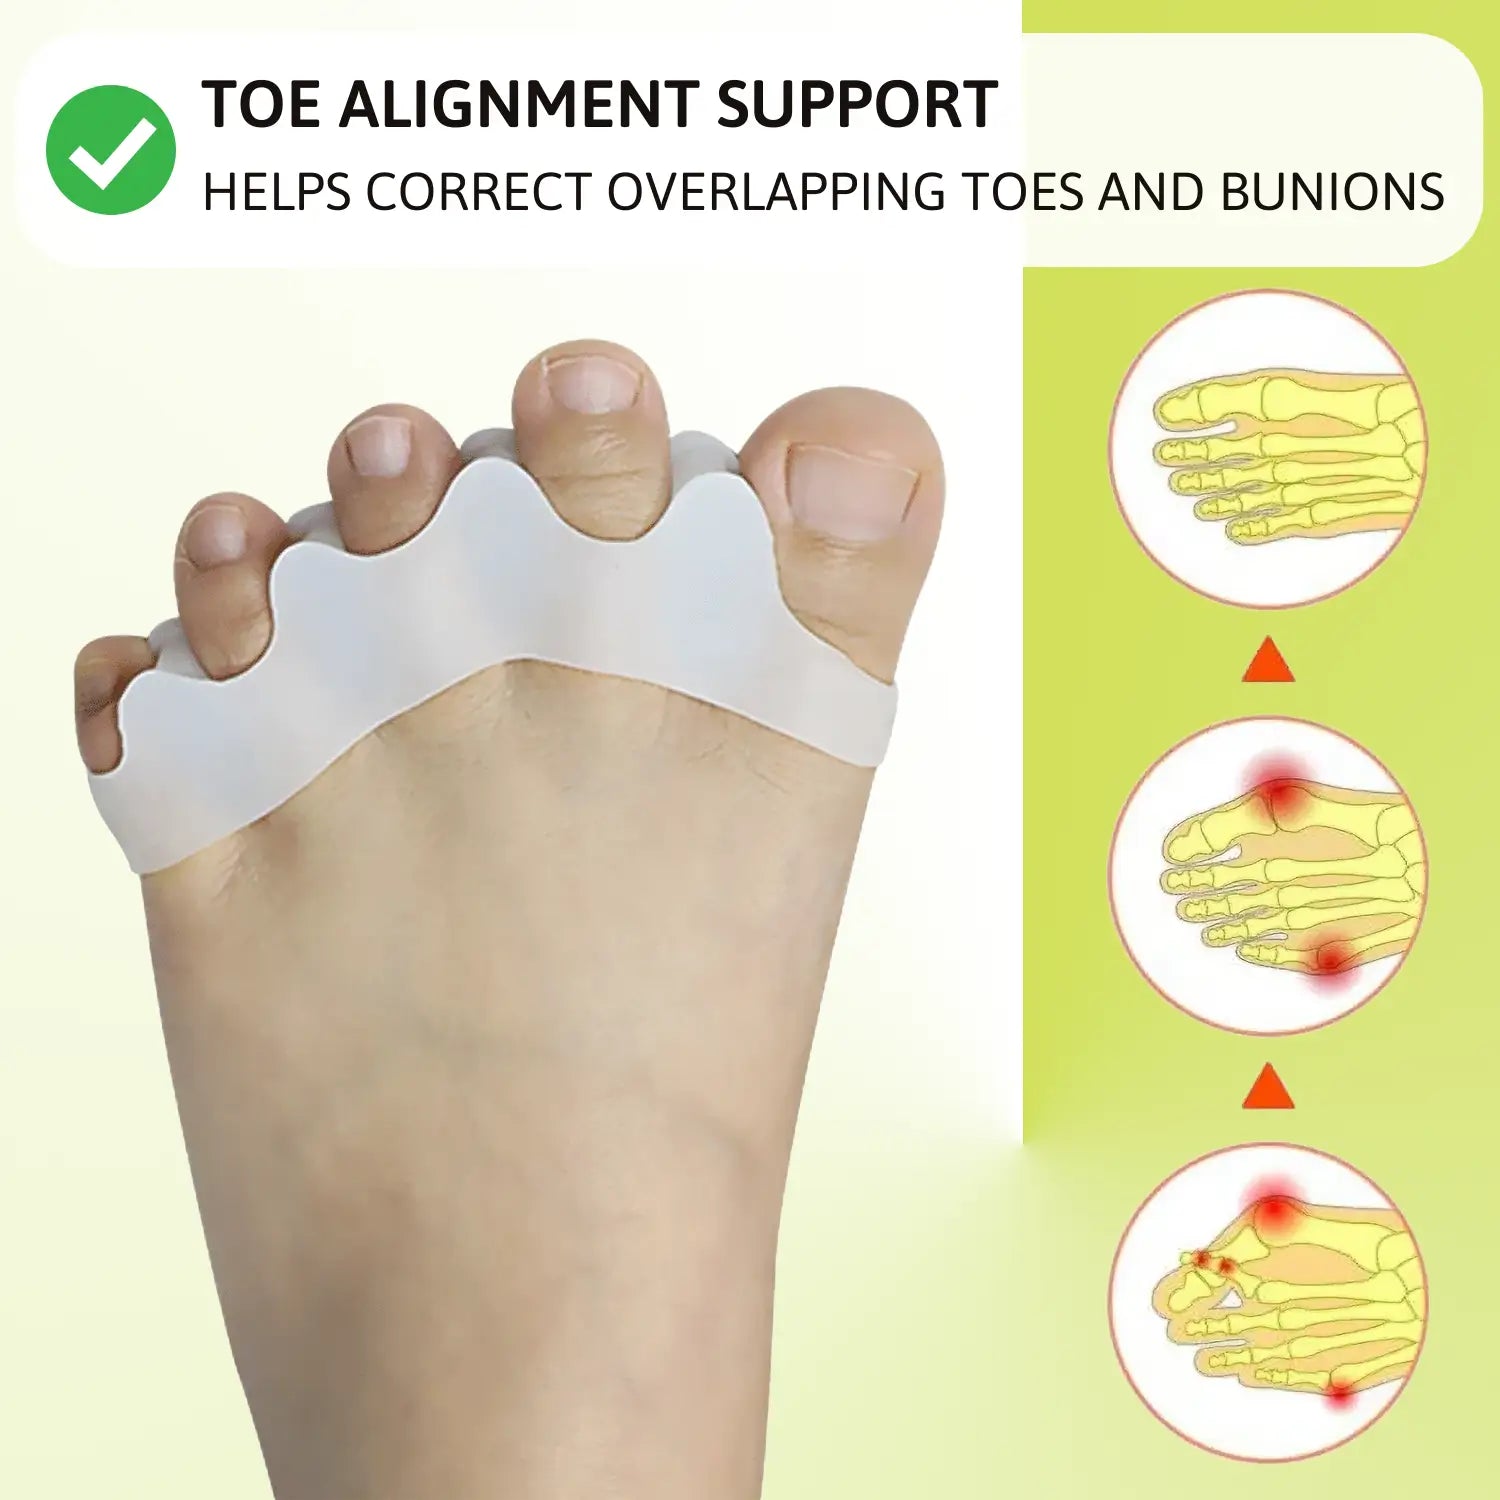 Purestep Toe Separator - Promotes Healthy Toes & Relieves Foot Pain